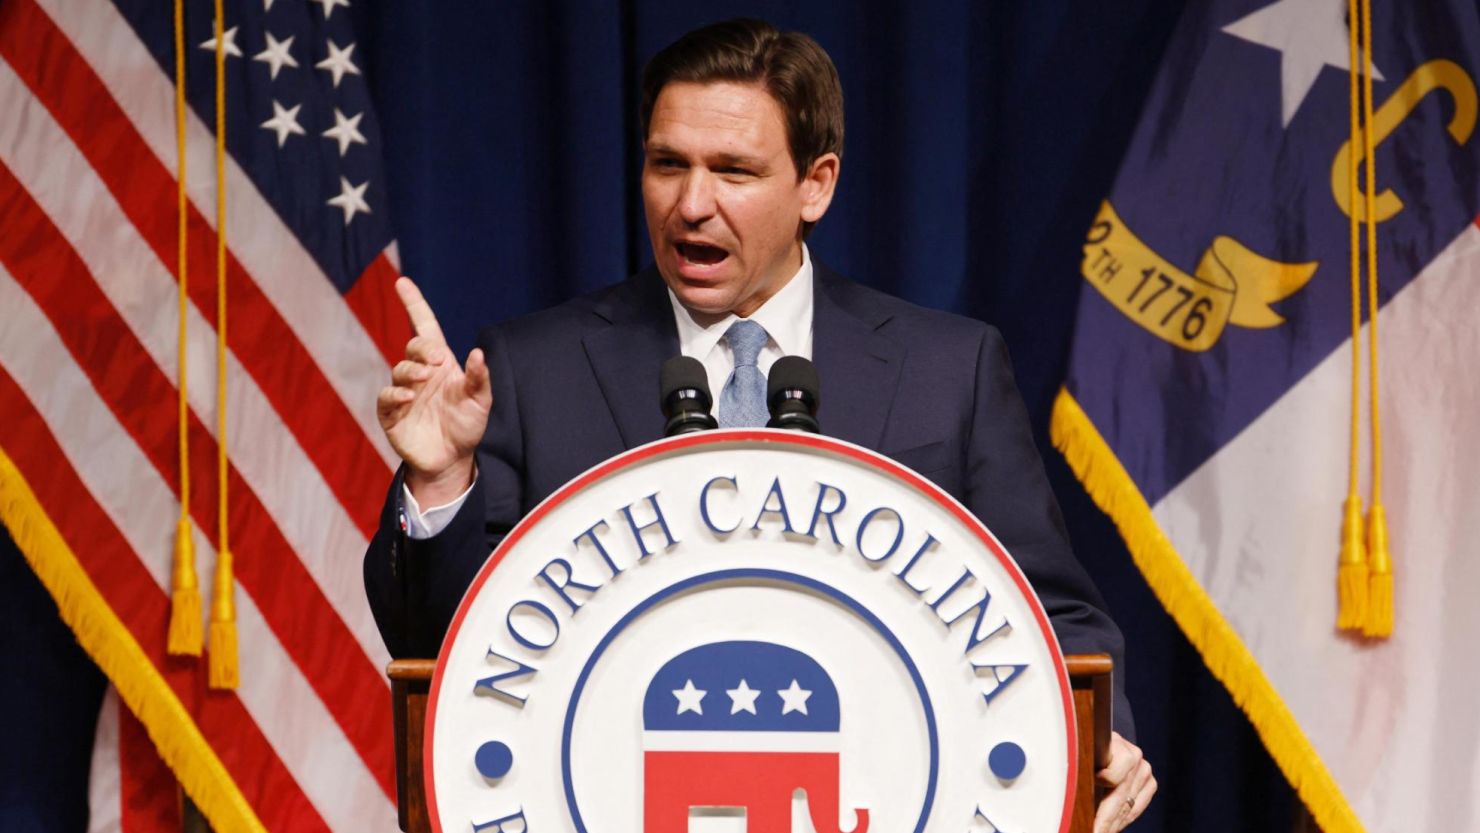 Florida governor and Republican presidential candidate Ron DeSantis speaks at the North Carolina Republican Party convention in Greensboro, North Carolina, on June 9, 2023.  